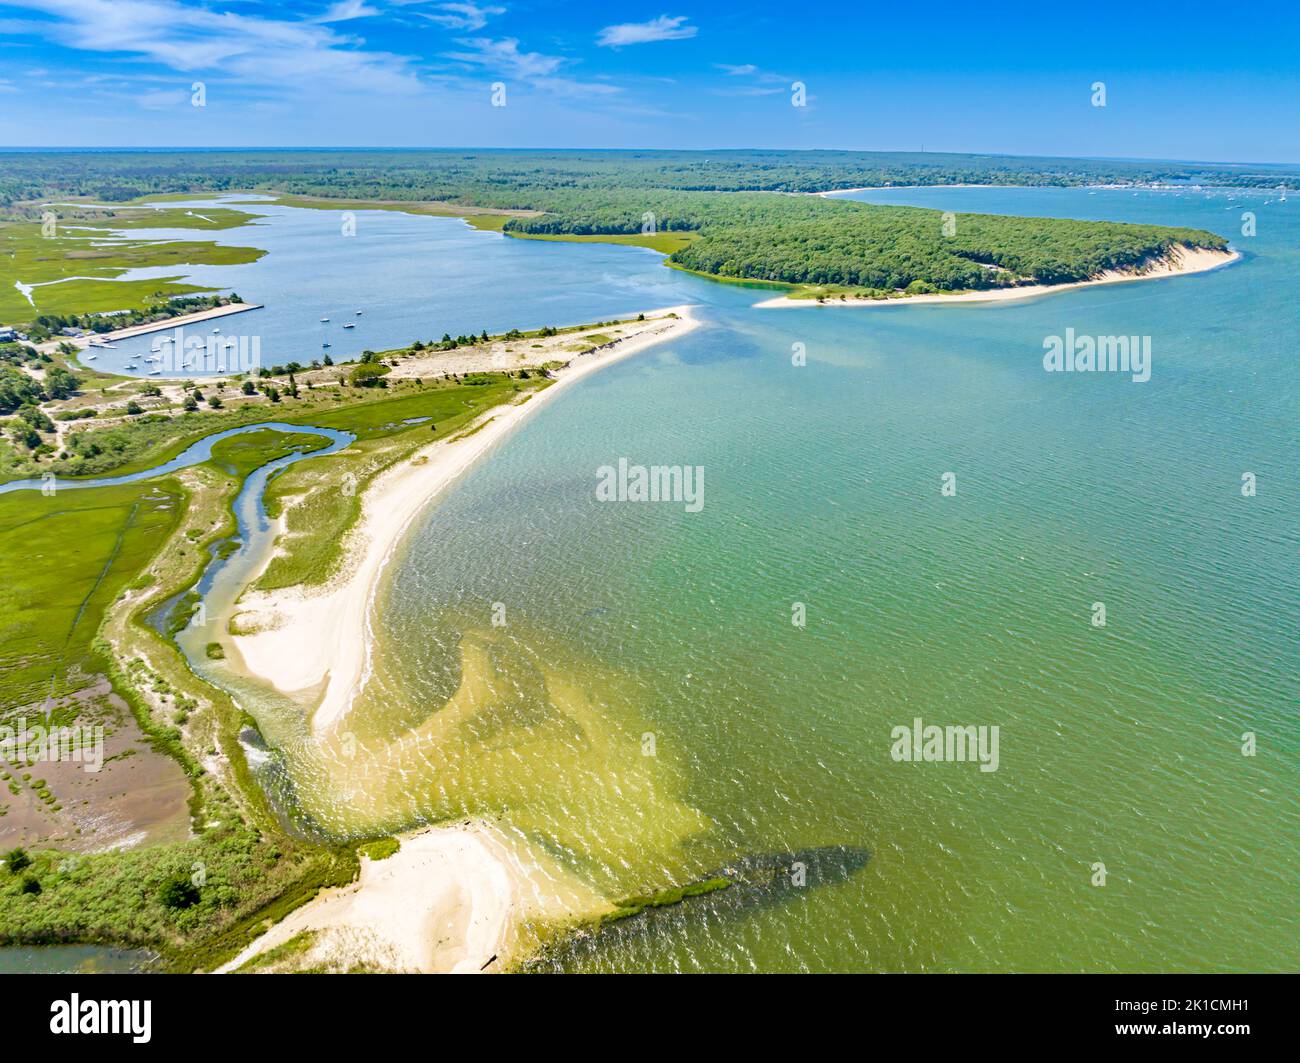 Aerial images of Northwest harbor county park Stock Photo